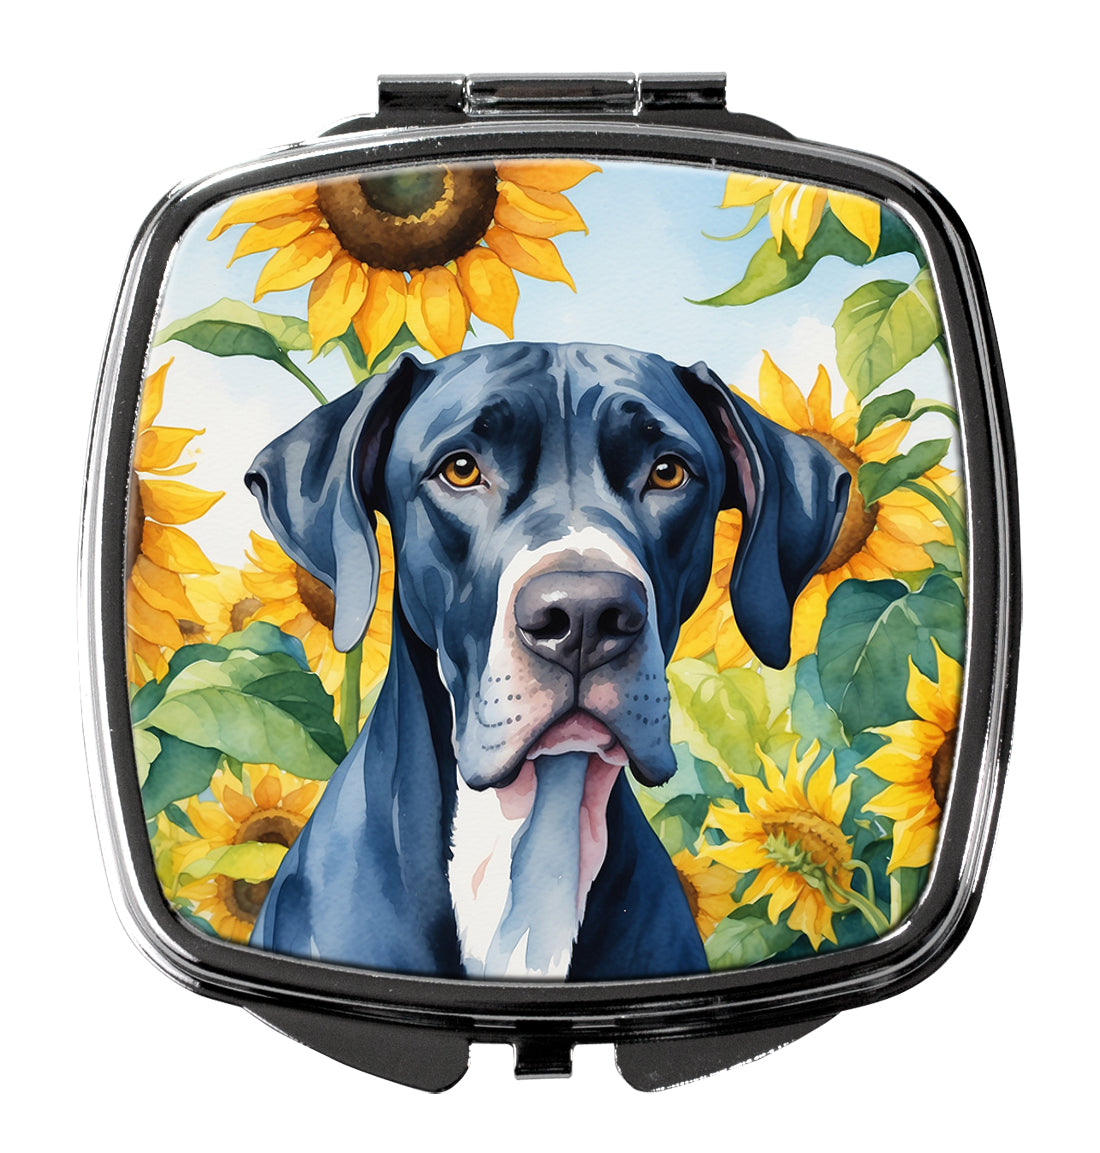 Buy this Great Dane in Sunflowers Compact Mirror